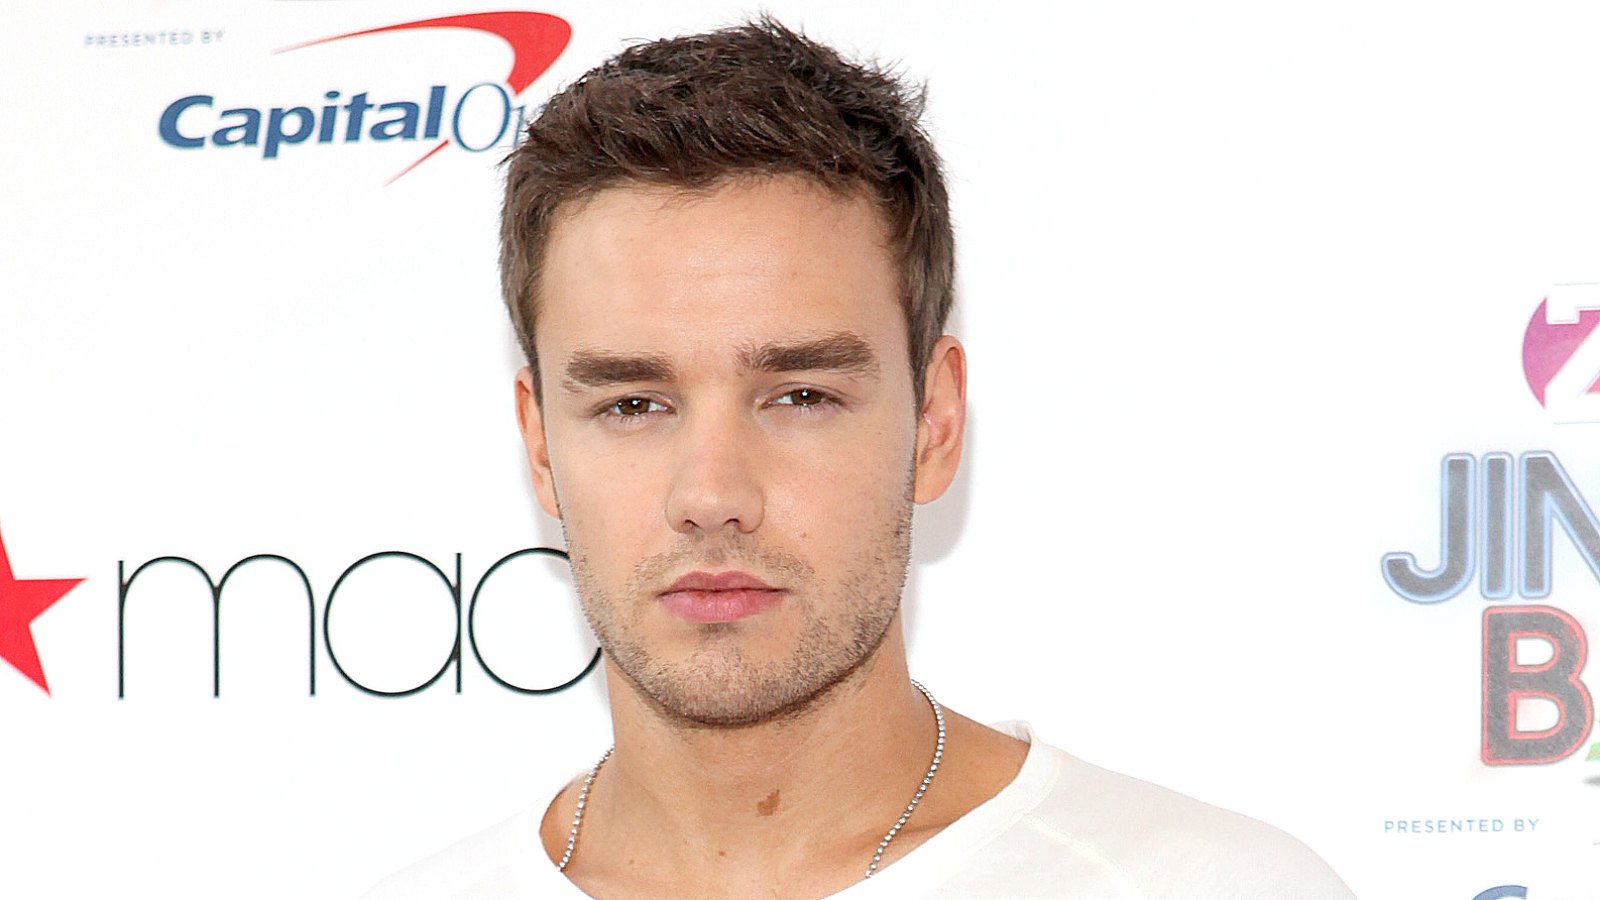 Liam Payne attends Z100's Jingle Ball 2017 Official Kick-Off Event at Macy's Herald Square on October 10, 2017 in New York City.